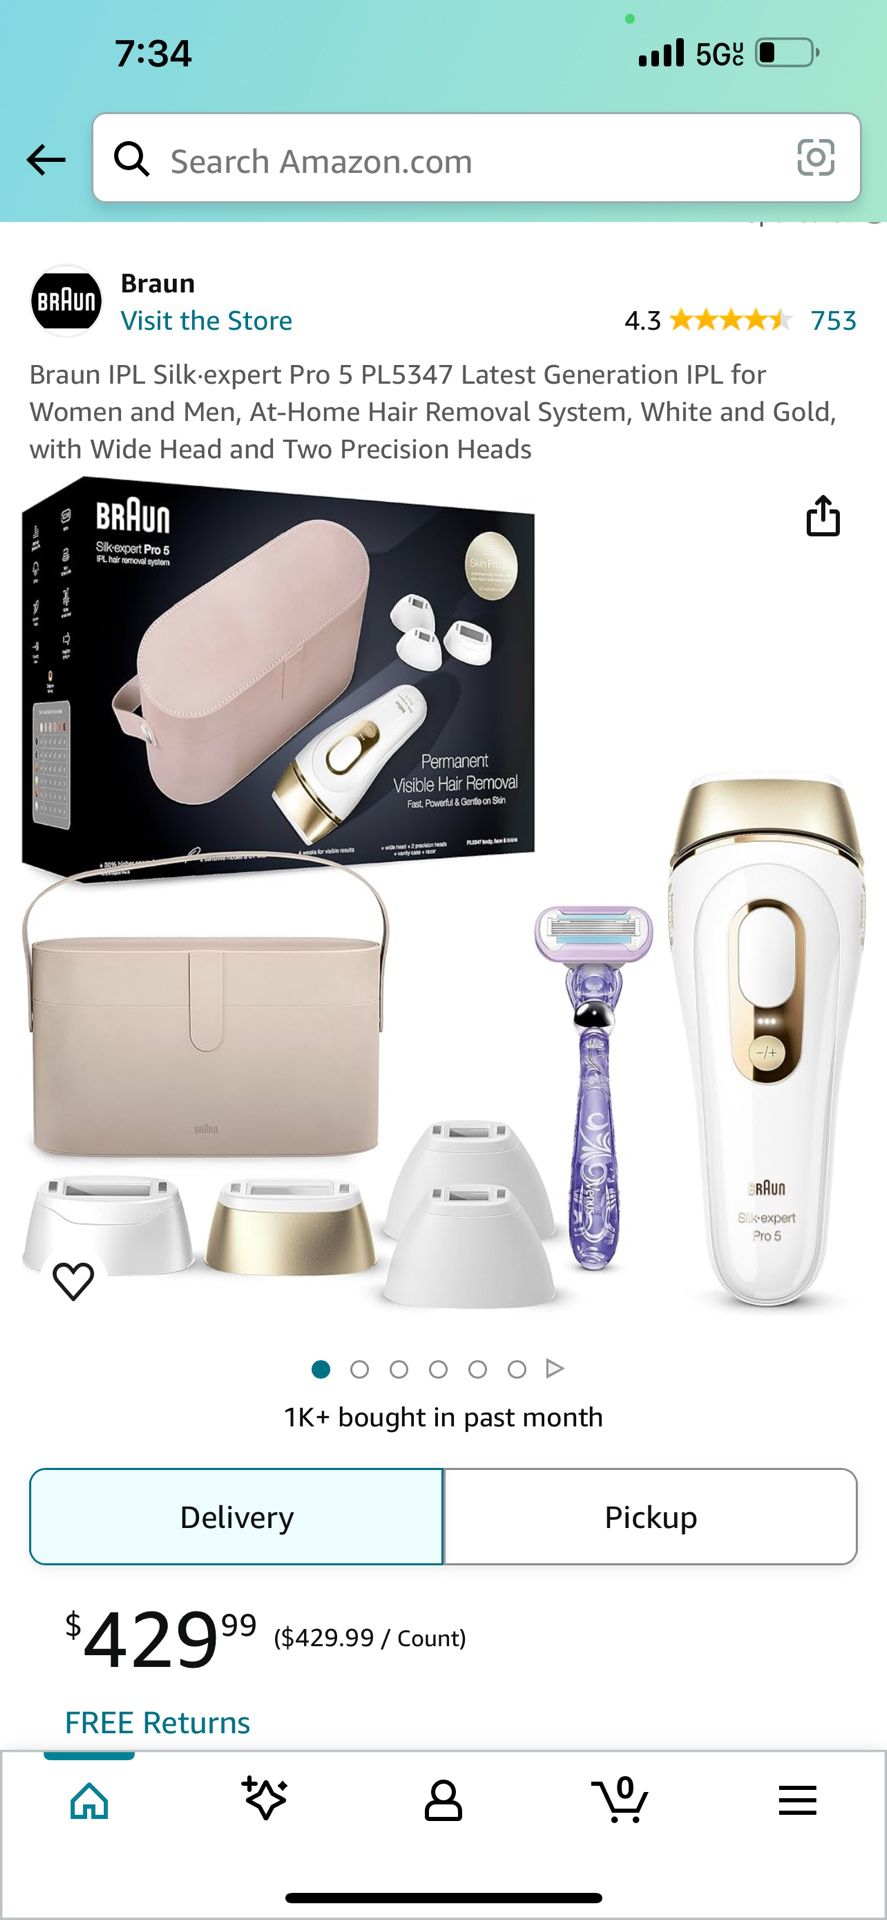 Braun IPL Silk-expert Pro 5 PL5347 Latest Generation IPL for Women and Men, At-Home Hair Removal System, White and Gold, with Wide Head and Two Precis